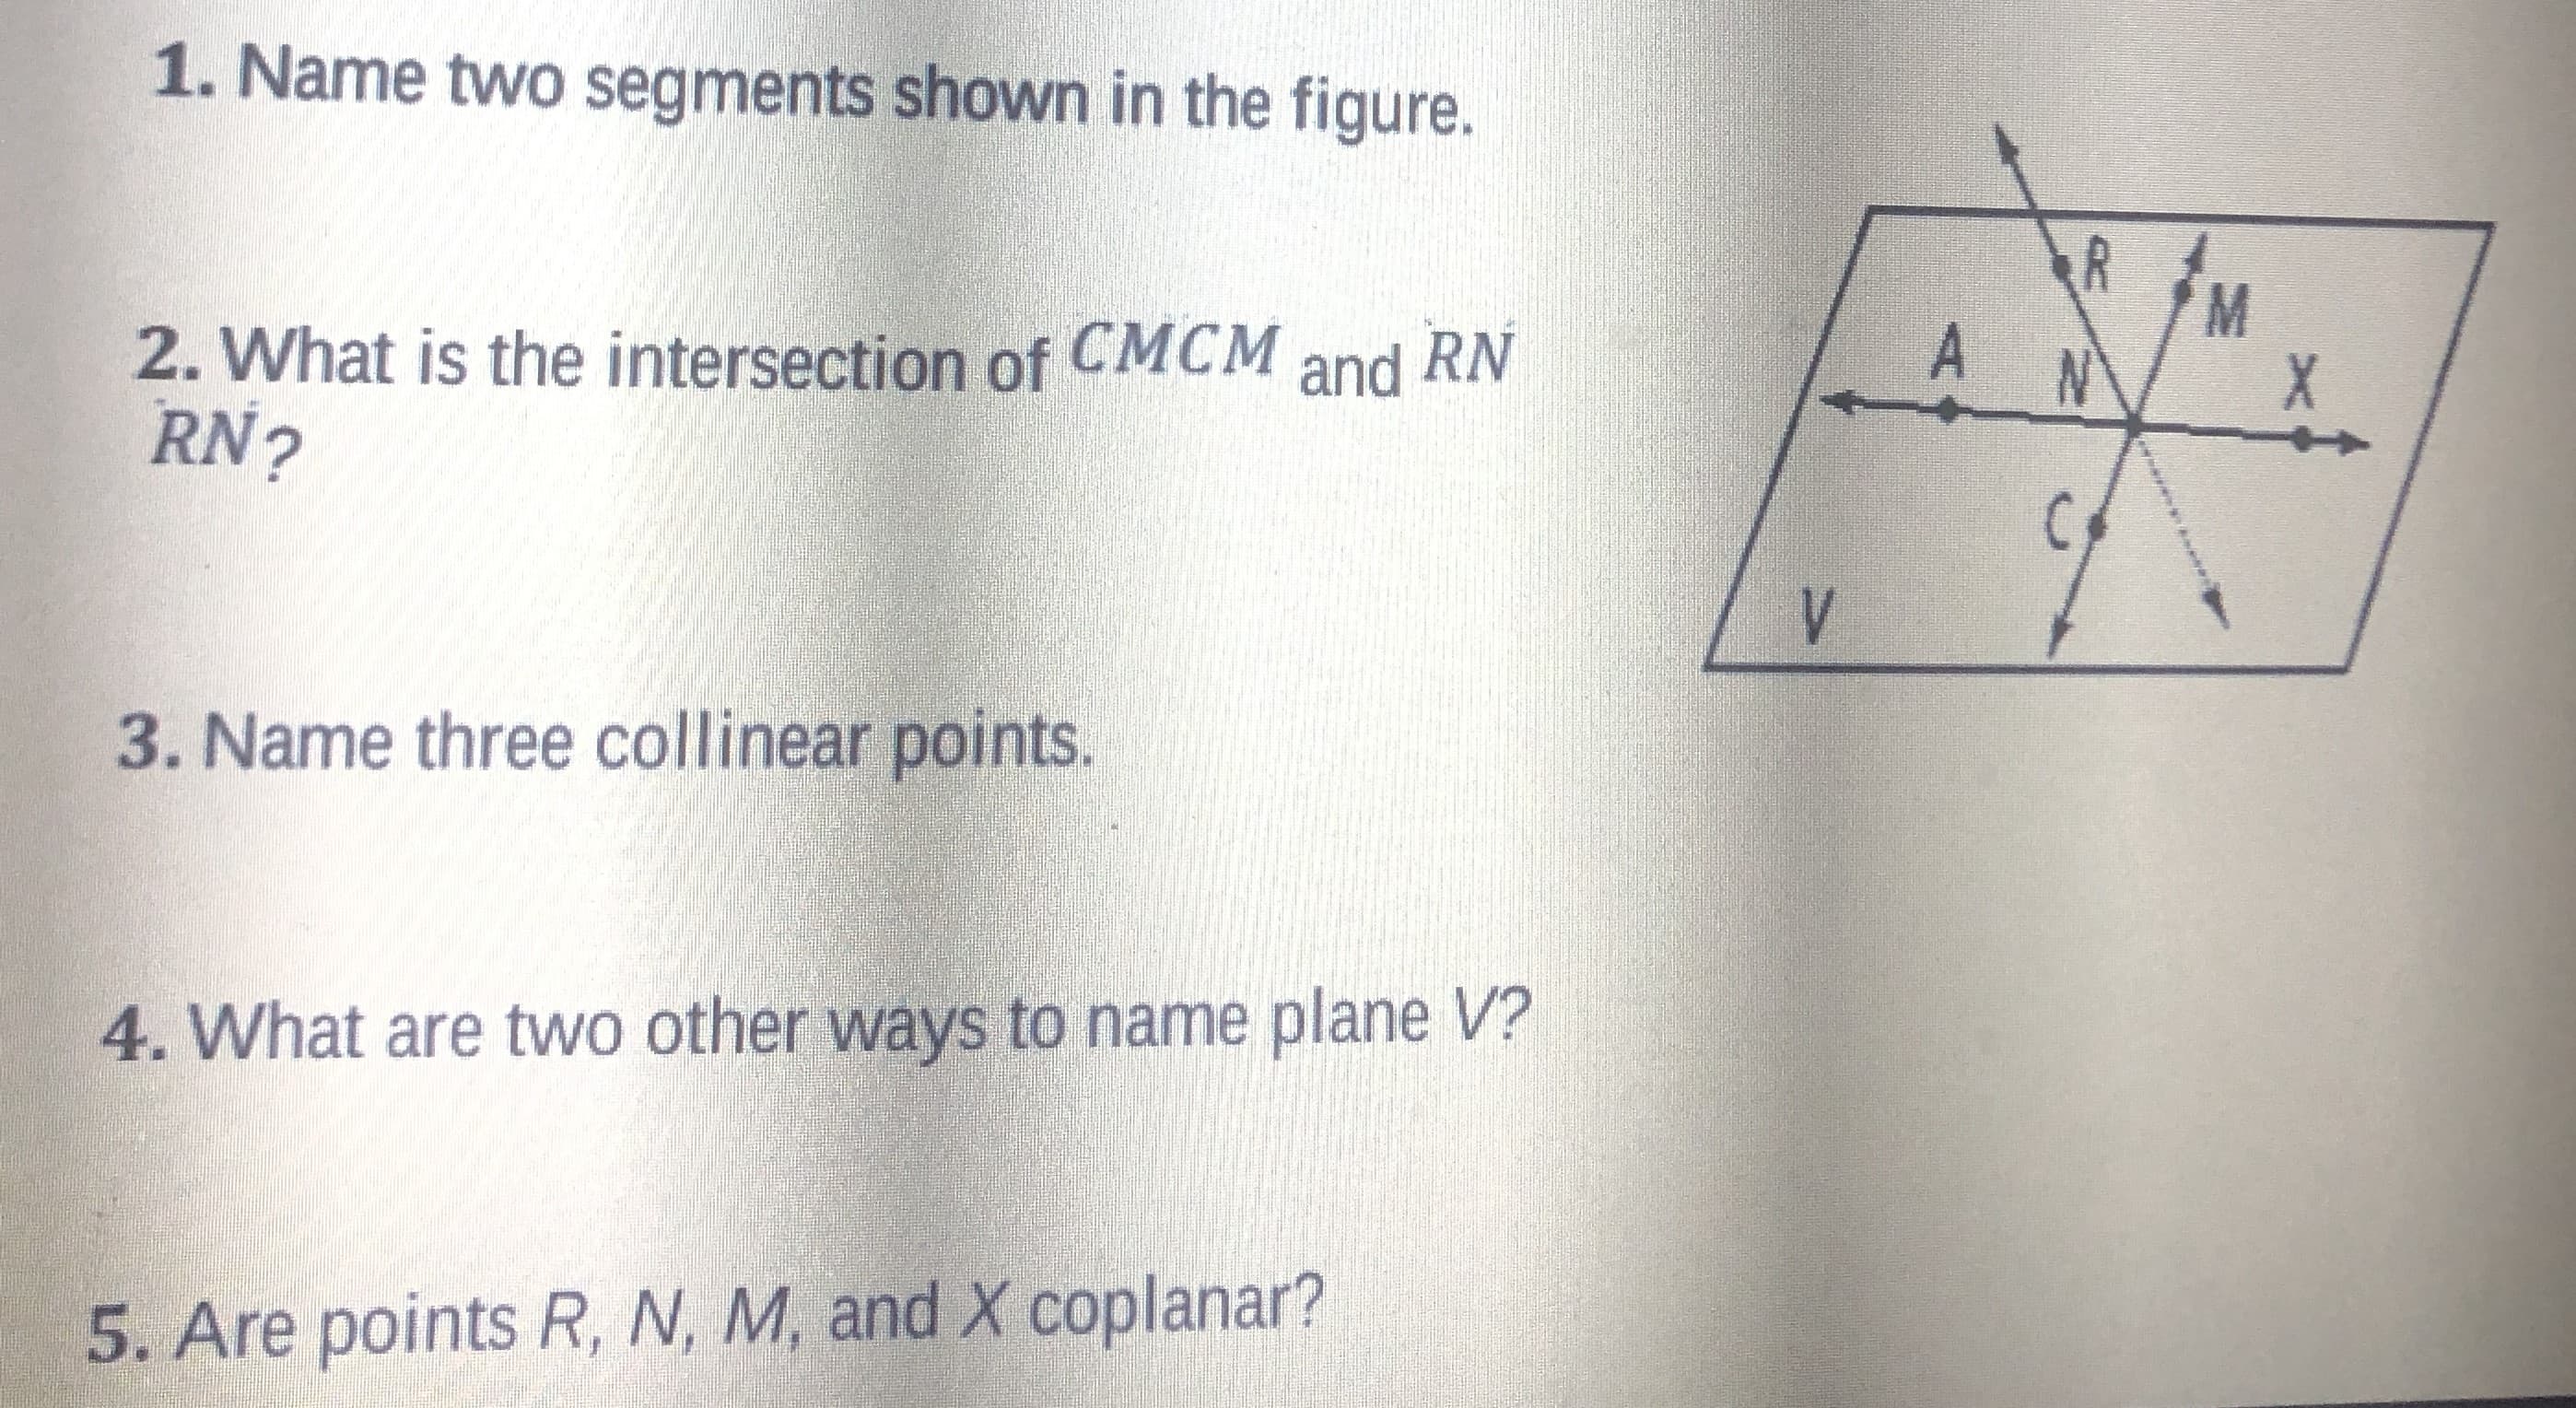 1. Name two segments shown in the figure.
R
A
СМСМ and
2. What is the intersection of
RN?
3. Name three collinear points.
4. What are two other ways to name plane V?
5. Are points R, N, M, and X coplanar?
